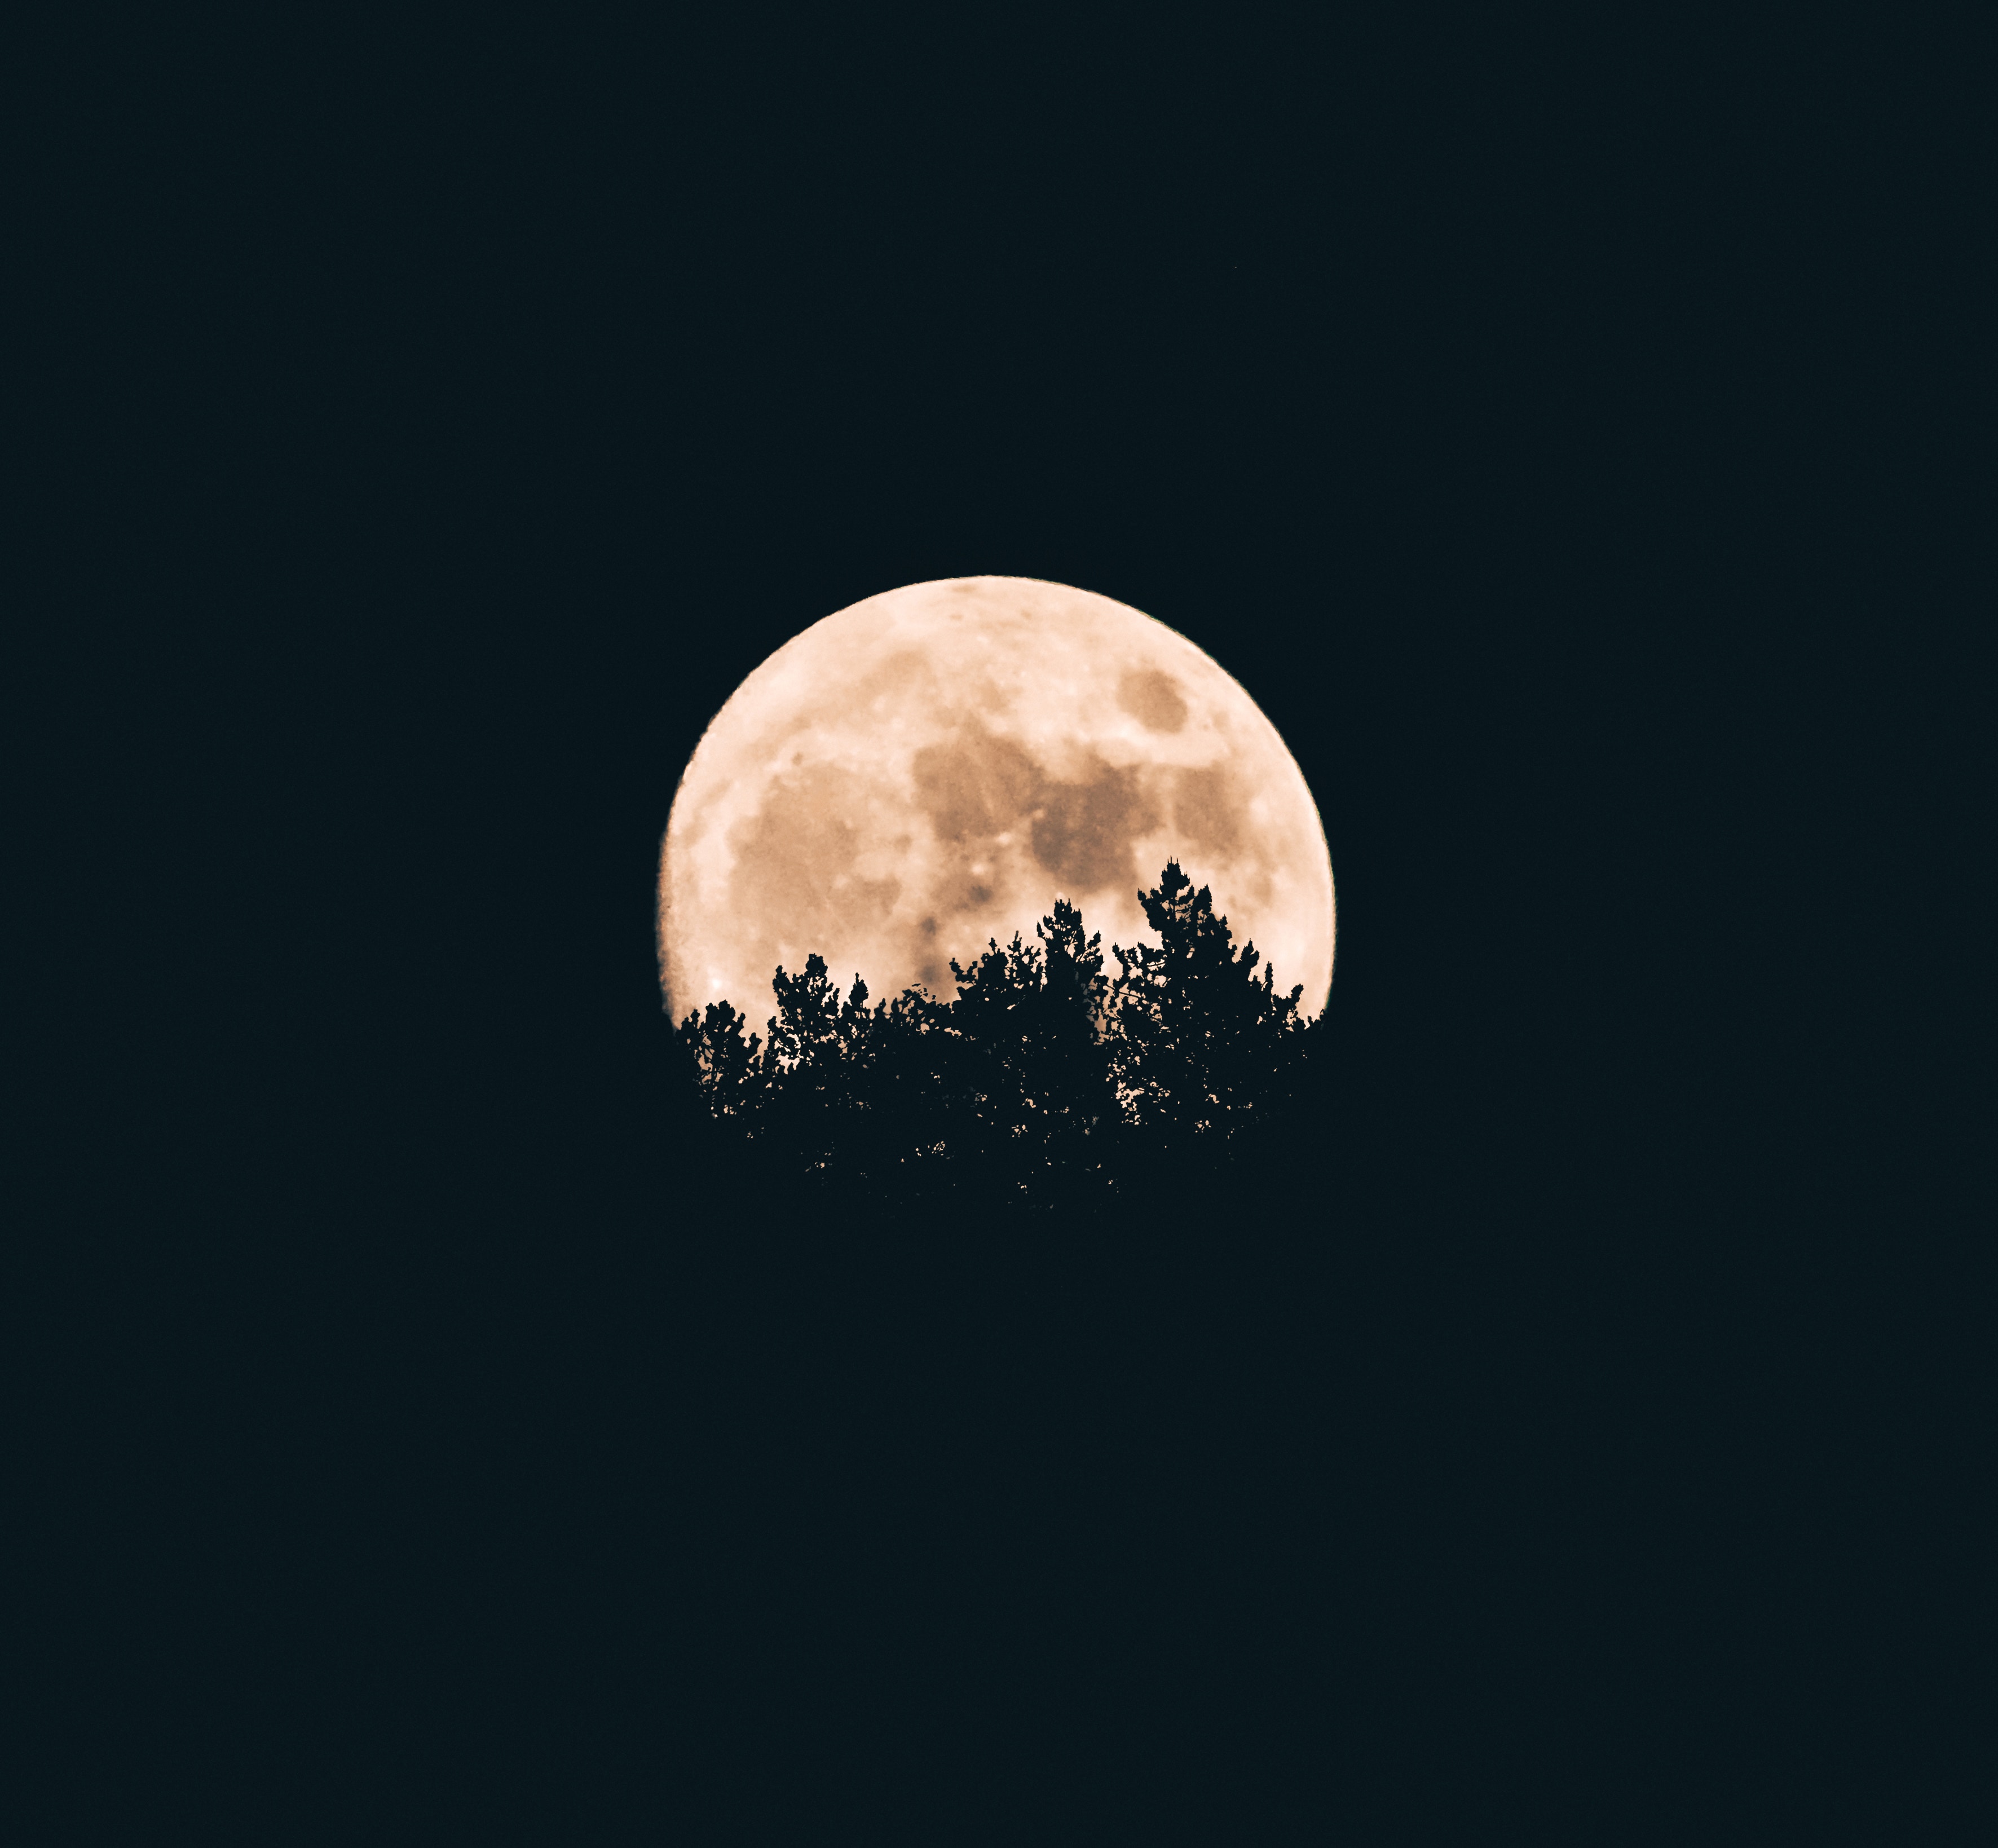 3543x3277 #tree, #sky, #night, #moon, #forest, #full moon, # wallpaper, #silhouette, #nature, #dark, #woodland, #fullmoon, #Free picture. Mocah HD Wallpaper